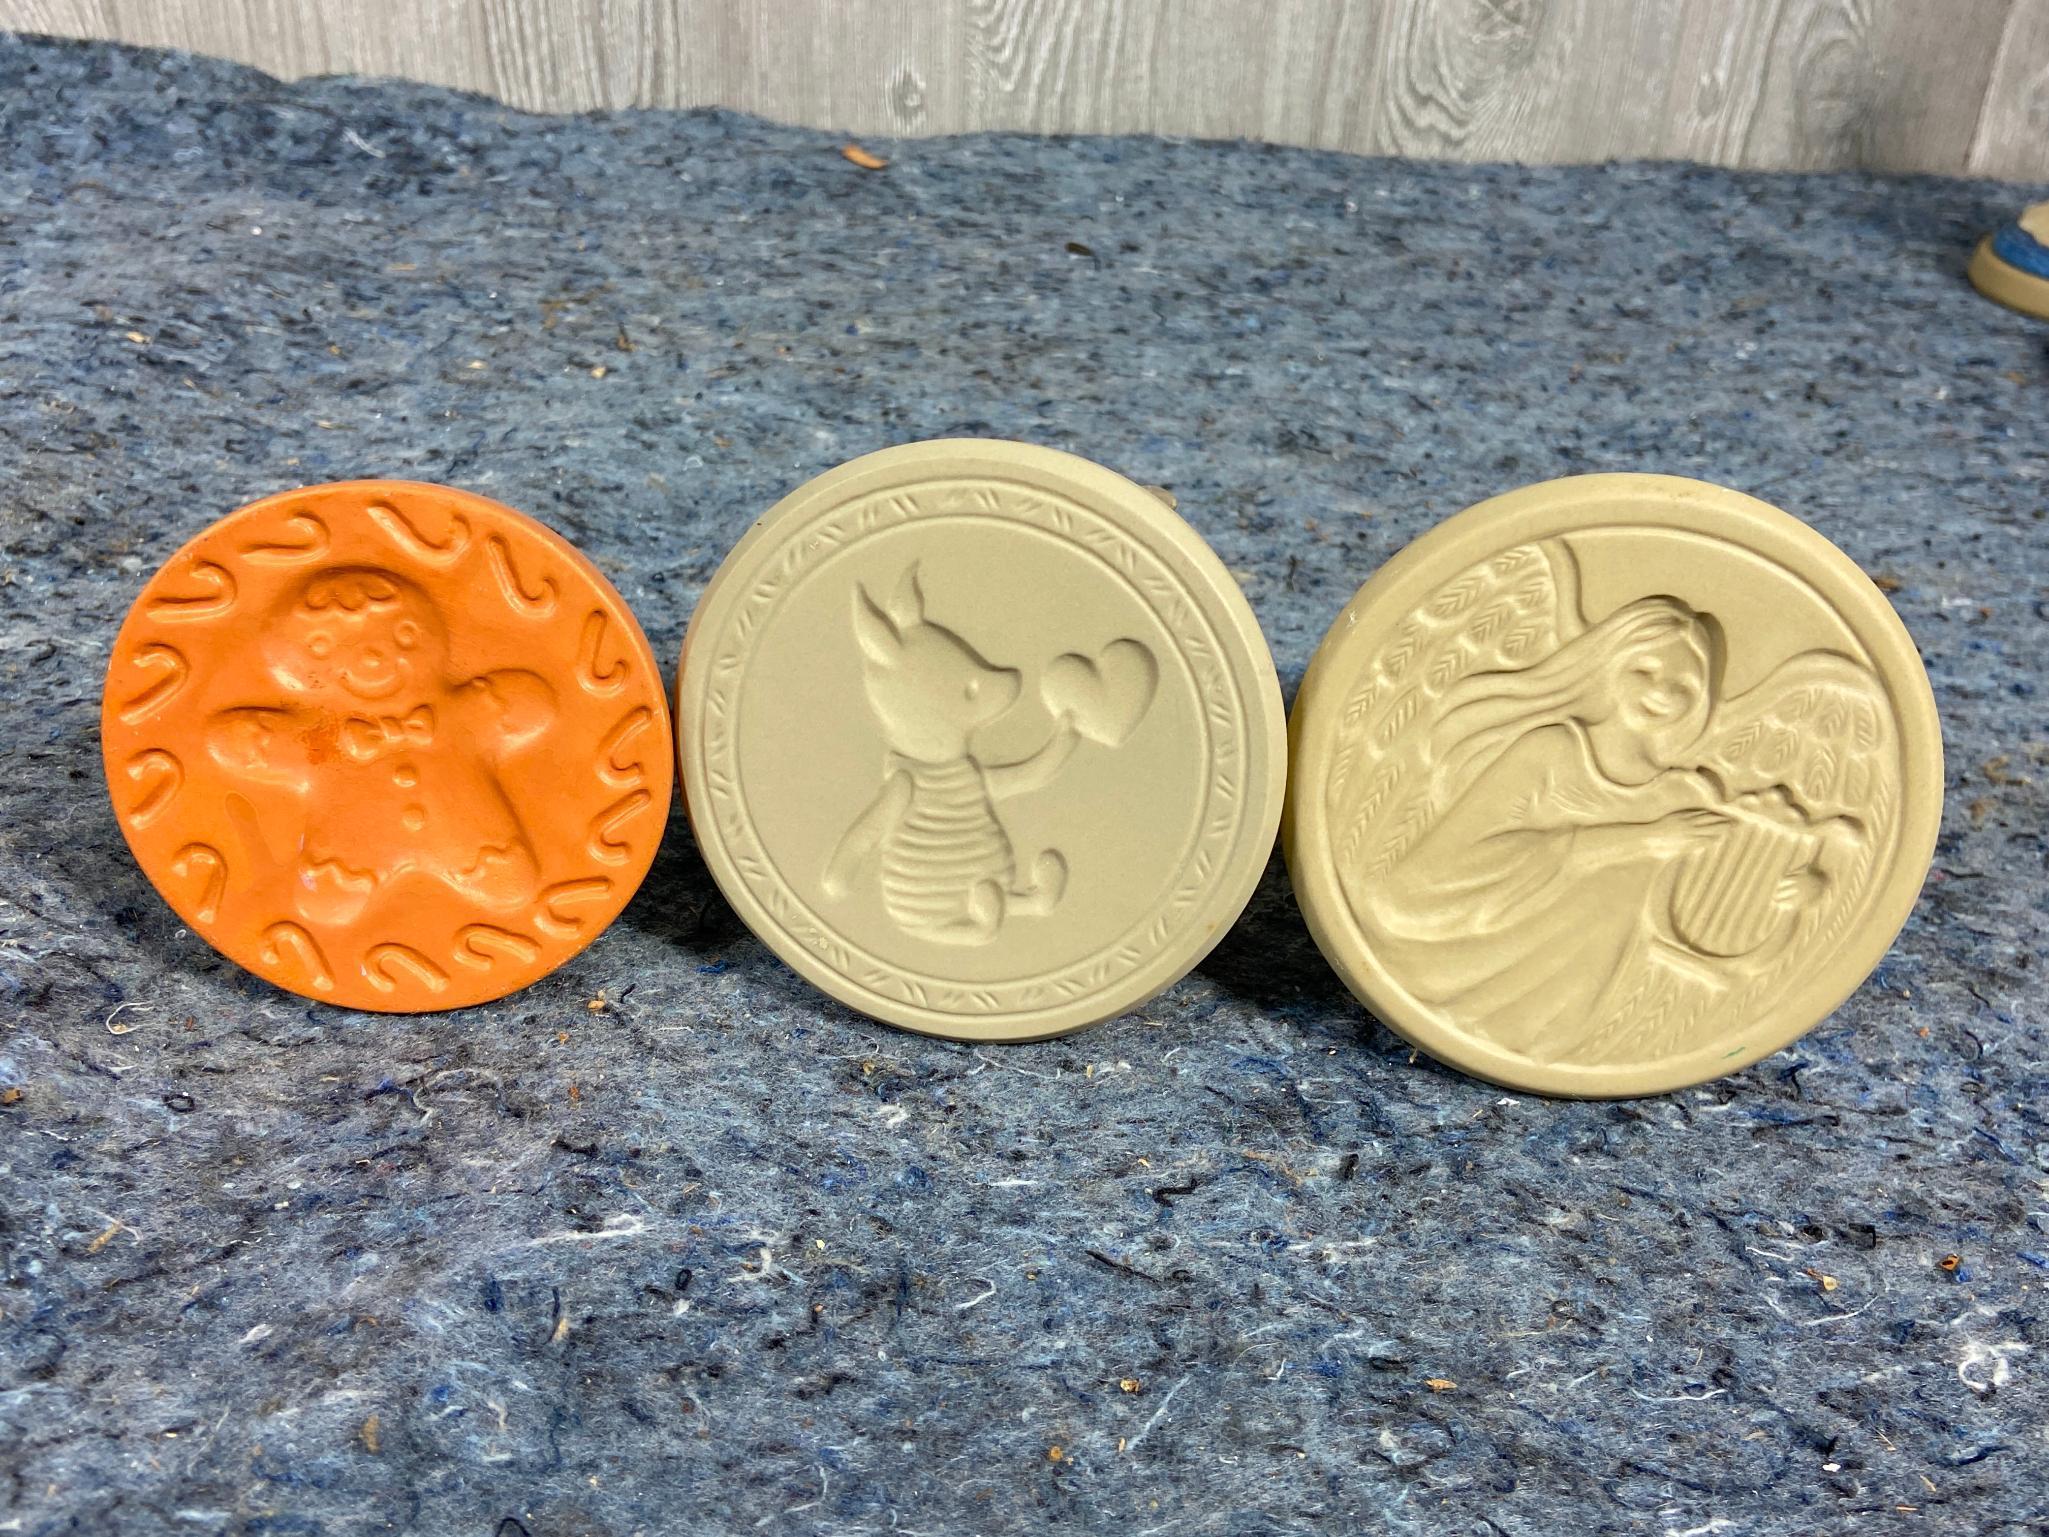 10 Vintage Cookie Molds including Horses, Tigers, Birthday Cake, Santa, Beach, and More